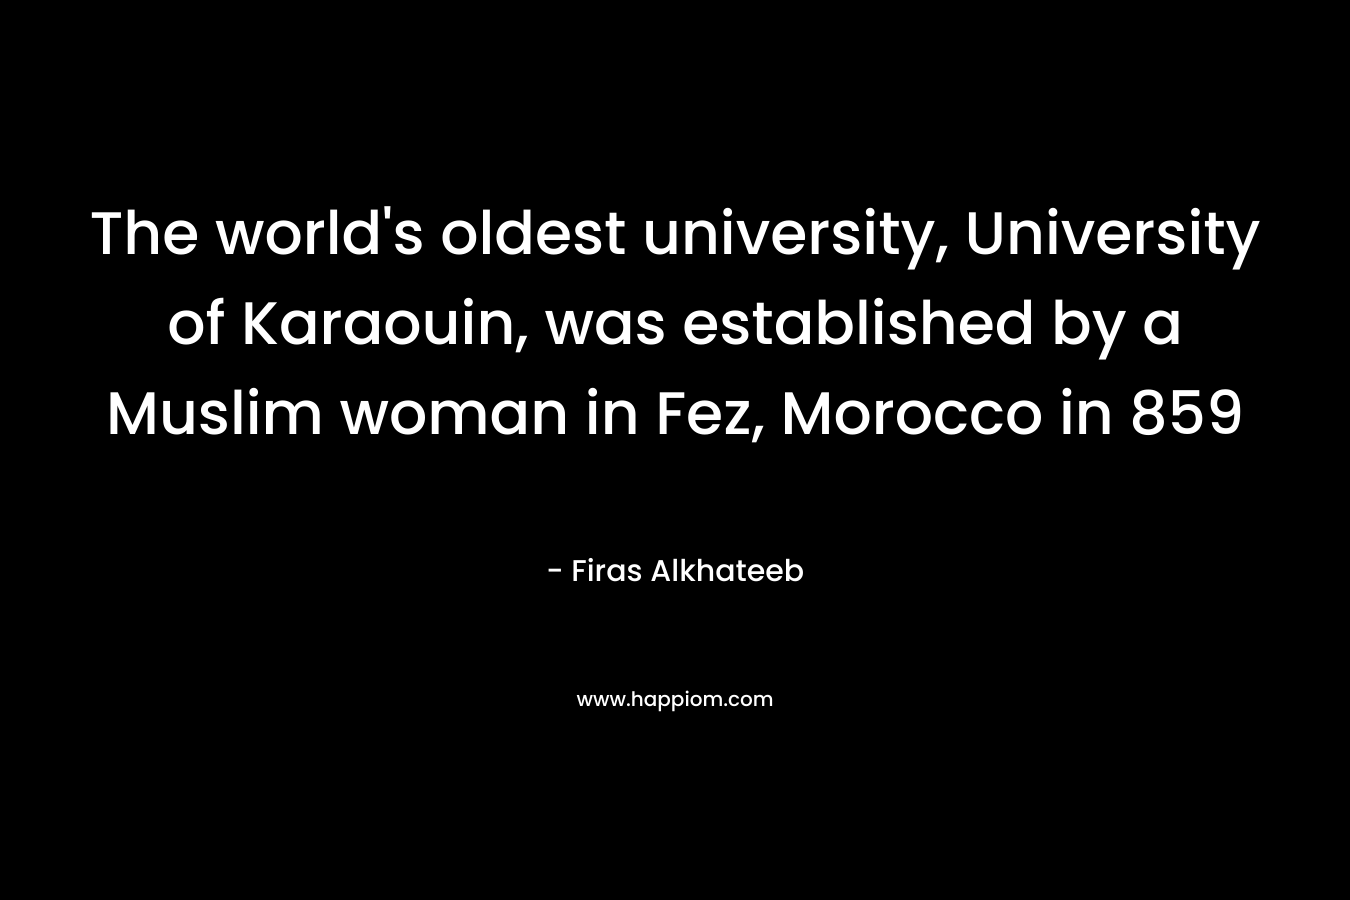 The world's oldest university, University of Karaouin, was established by a Muslim woman in Fez, Morocco in 859